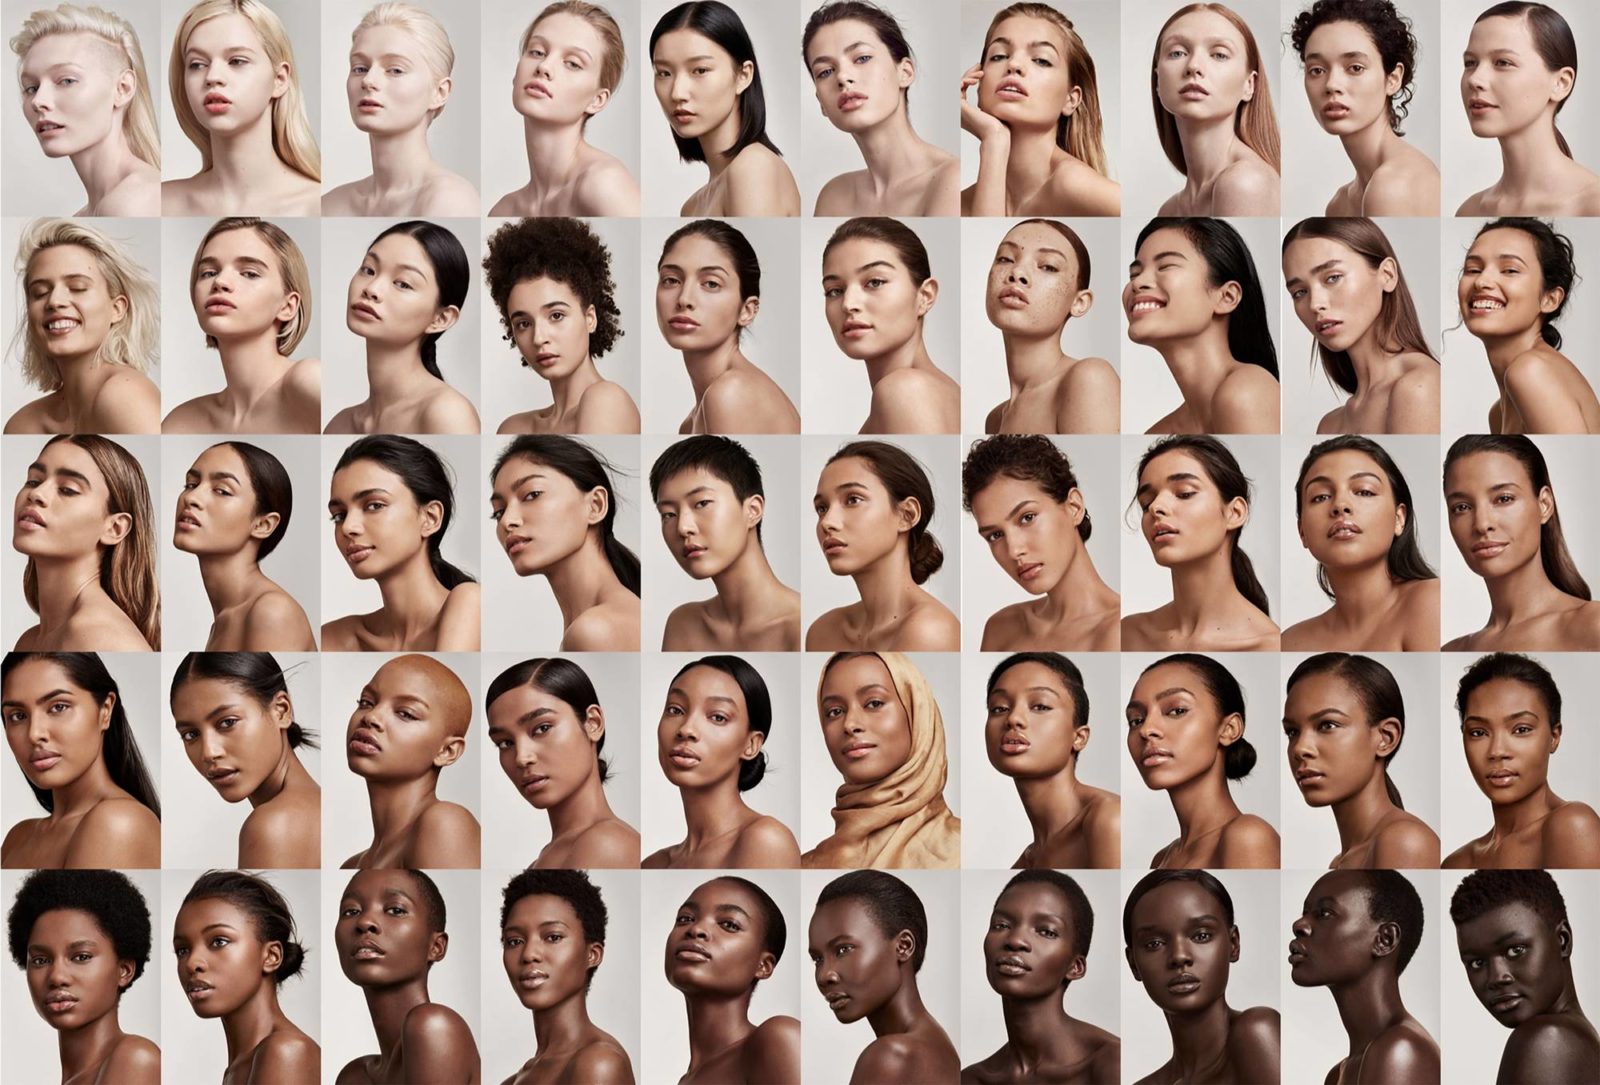 Fenty Built A Wildly Inclusive Beauty Brand Without Ever Explicitly